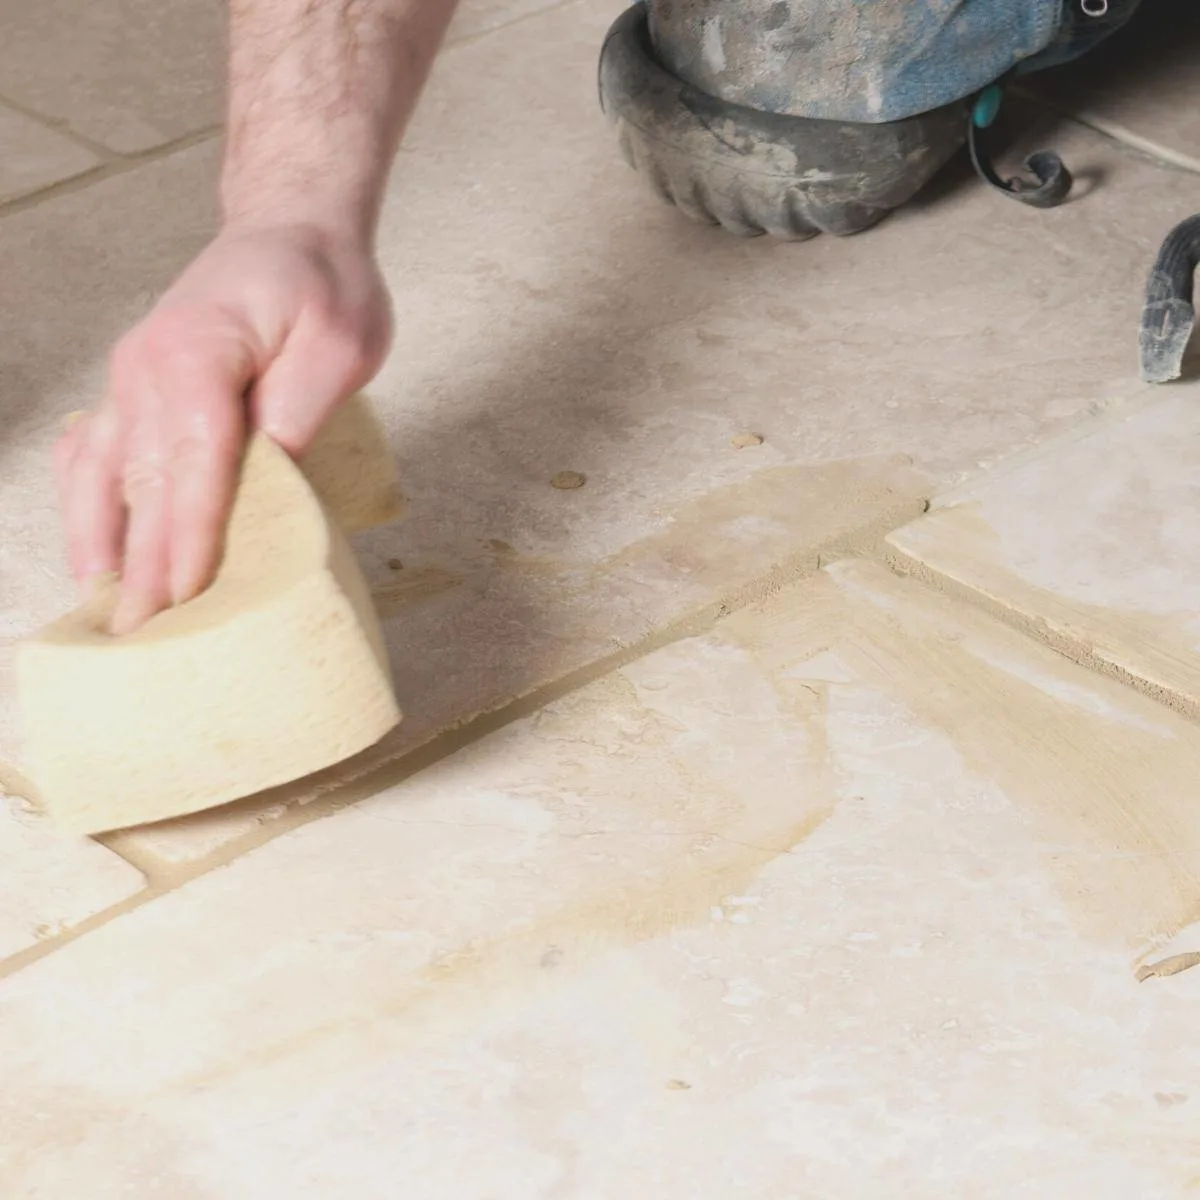 cleaning grout lines with a sponge